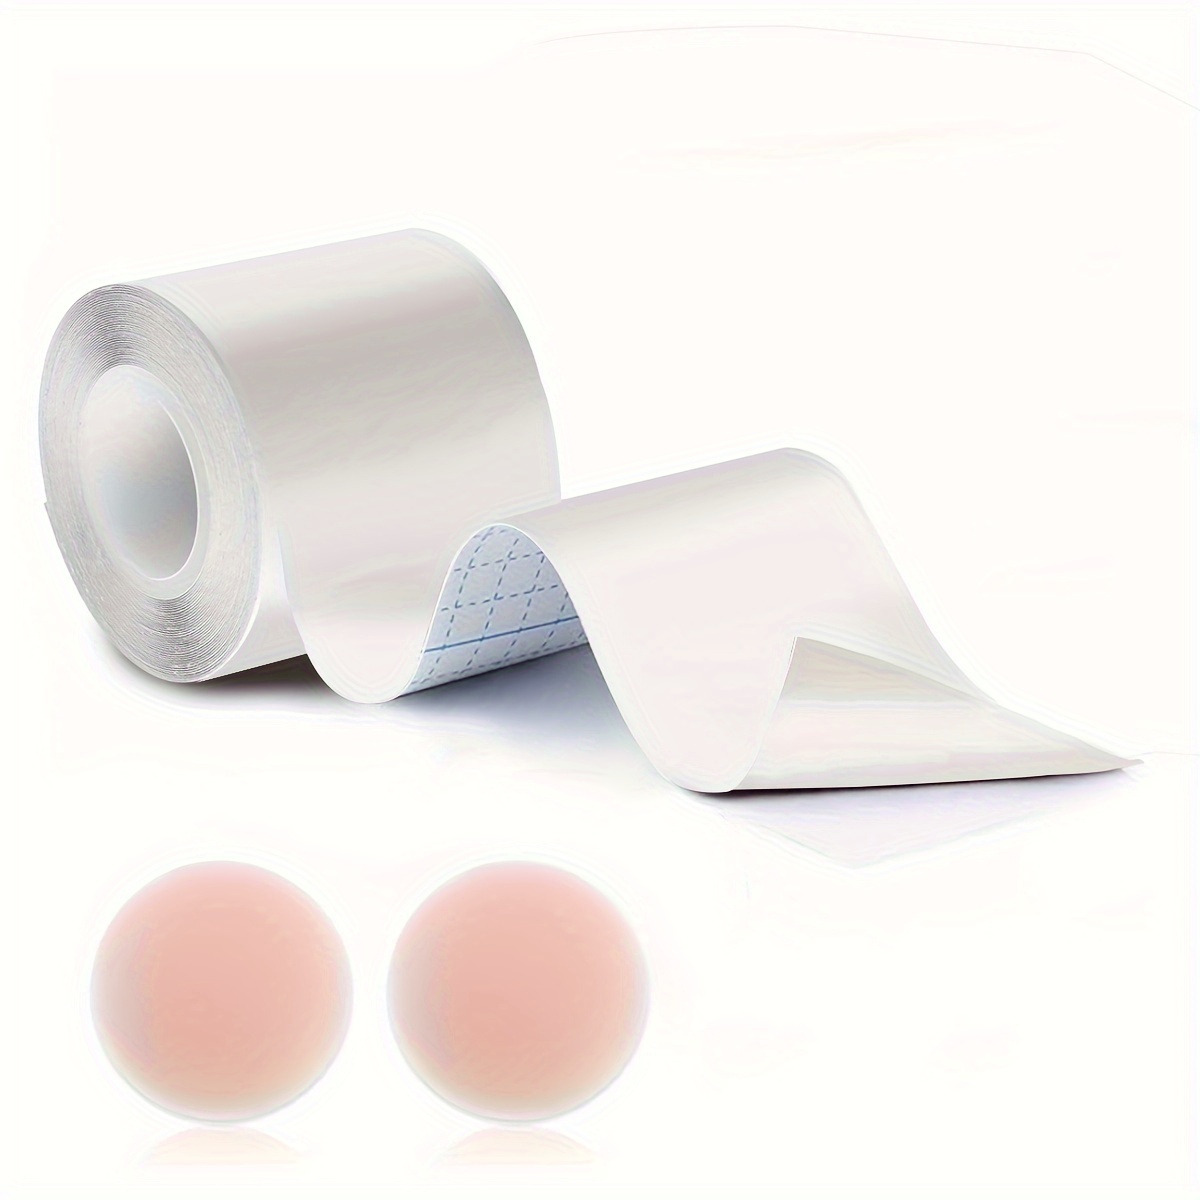 Breast Nipple Covers Intimates, Adhesive Tape Body